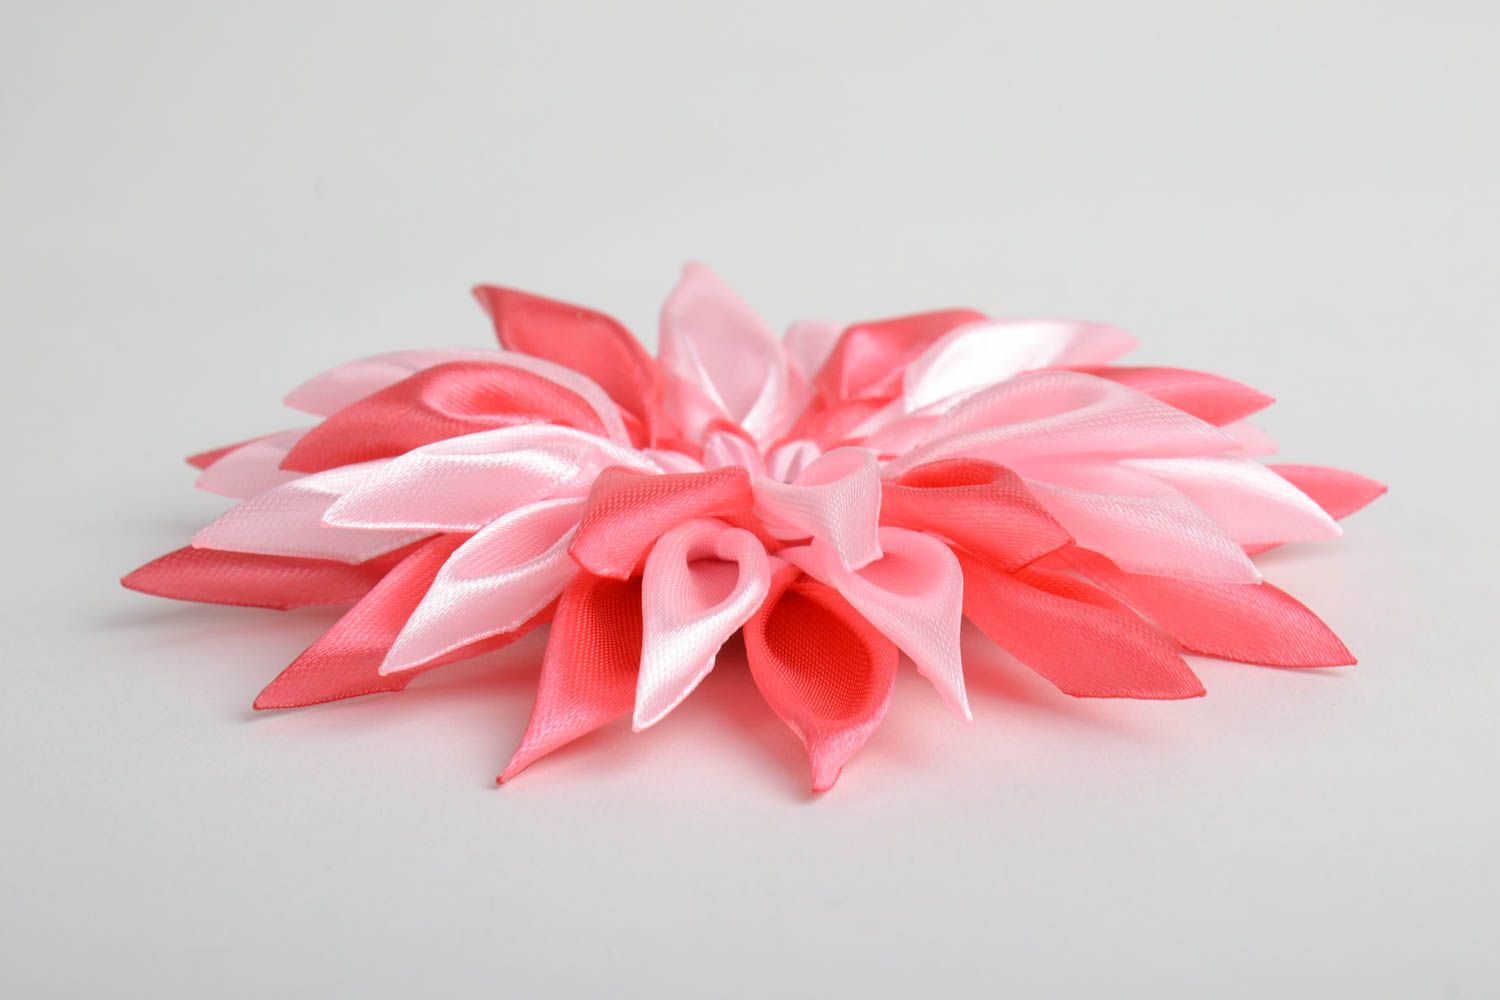 Handmade satin ribbon kanzashi flower in pink color for accessories making photo 2